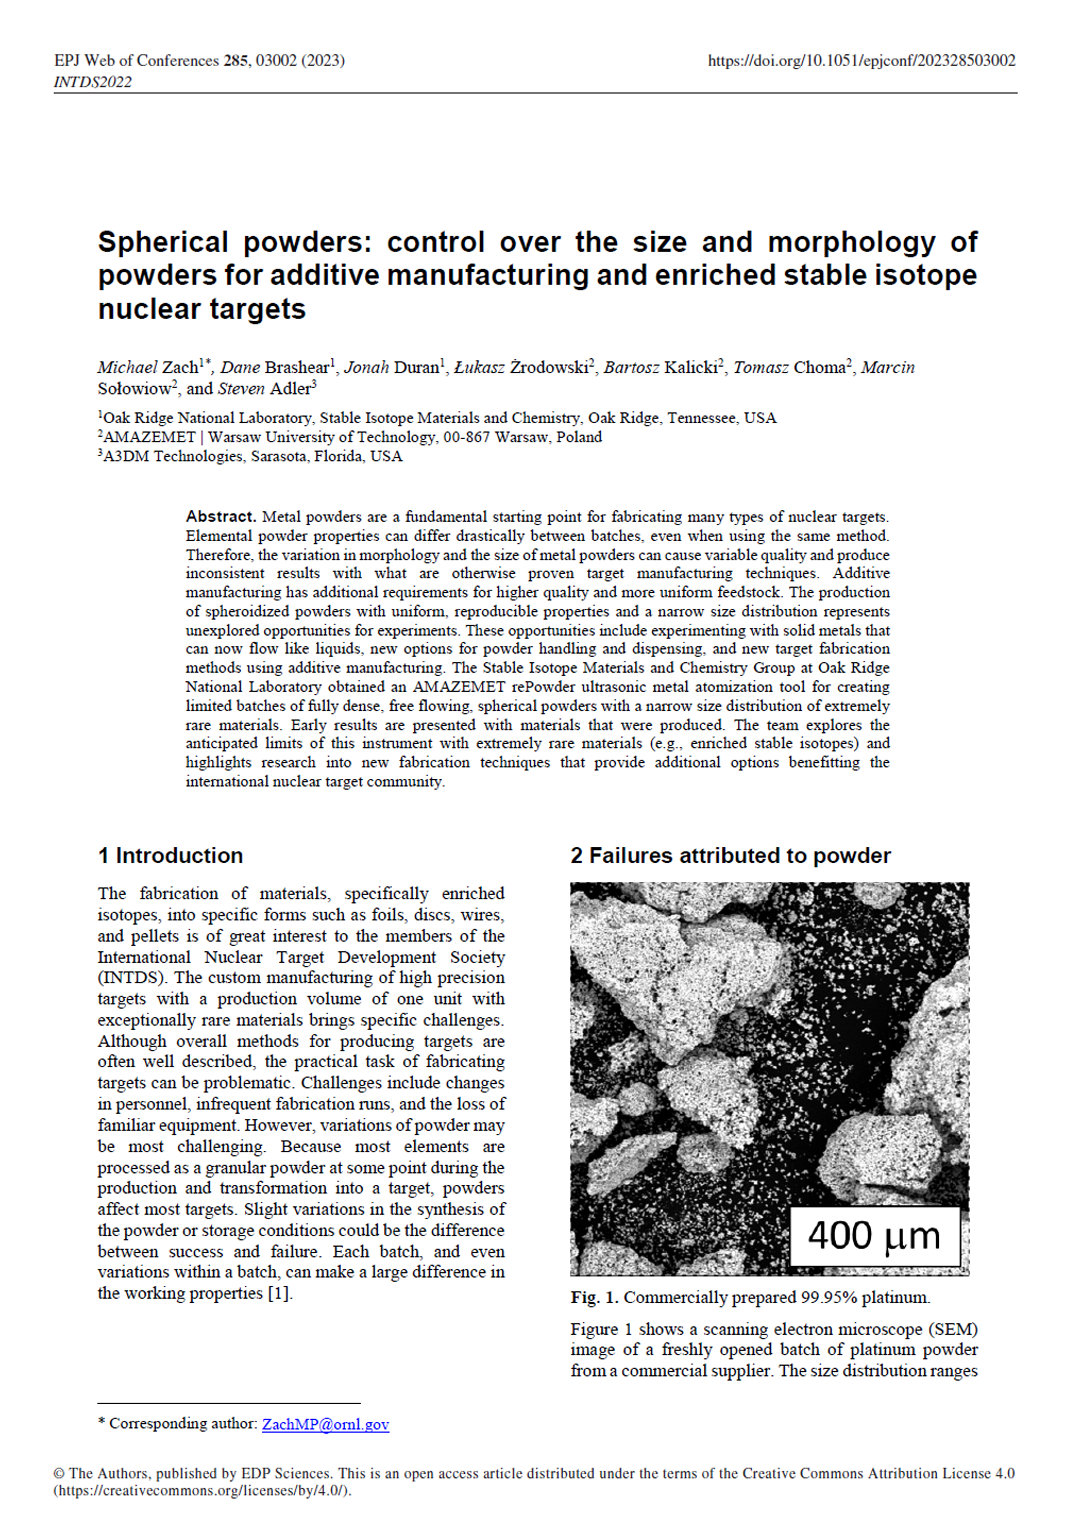 Spherical powders: control over the size and morphology of powders for additive manufacturing and enriched stable isotope nuclear targets